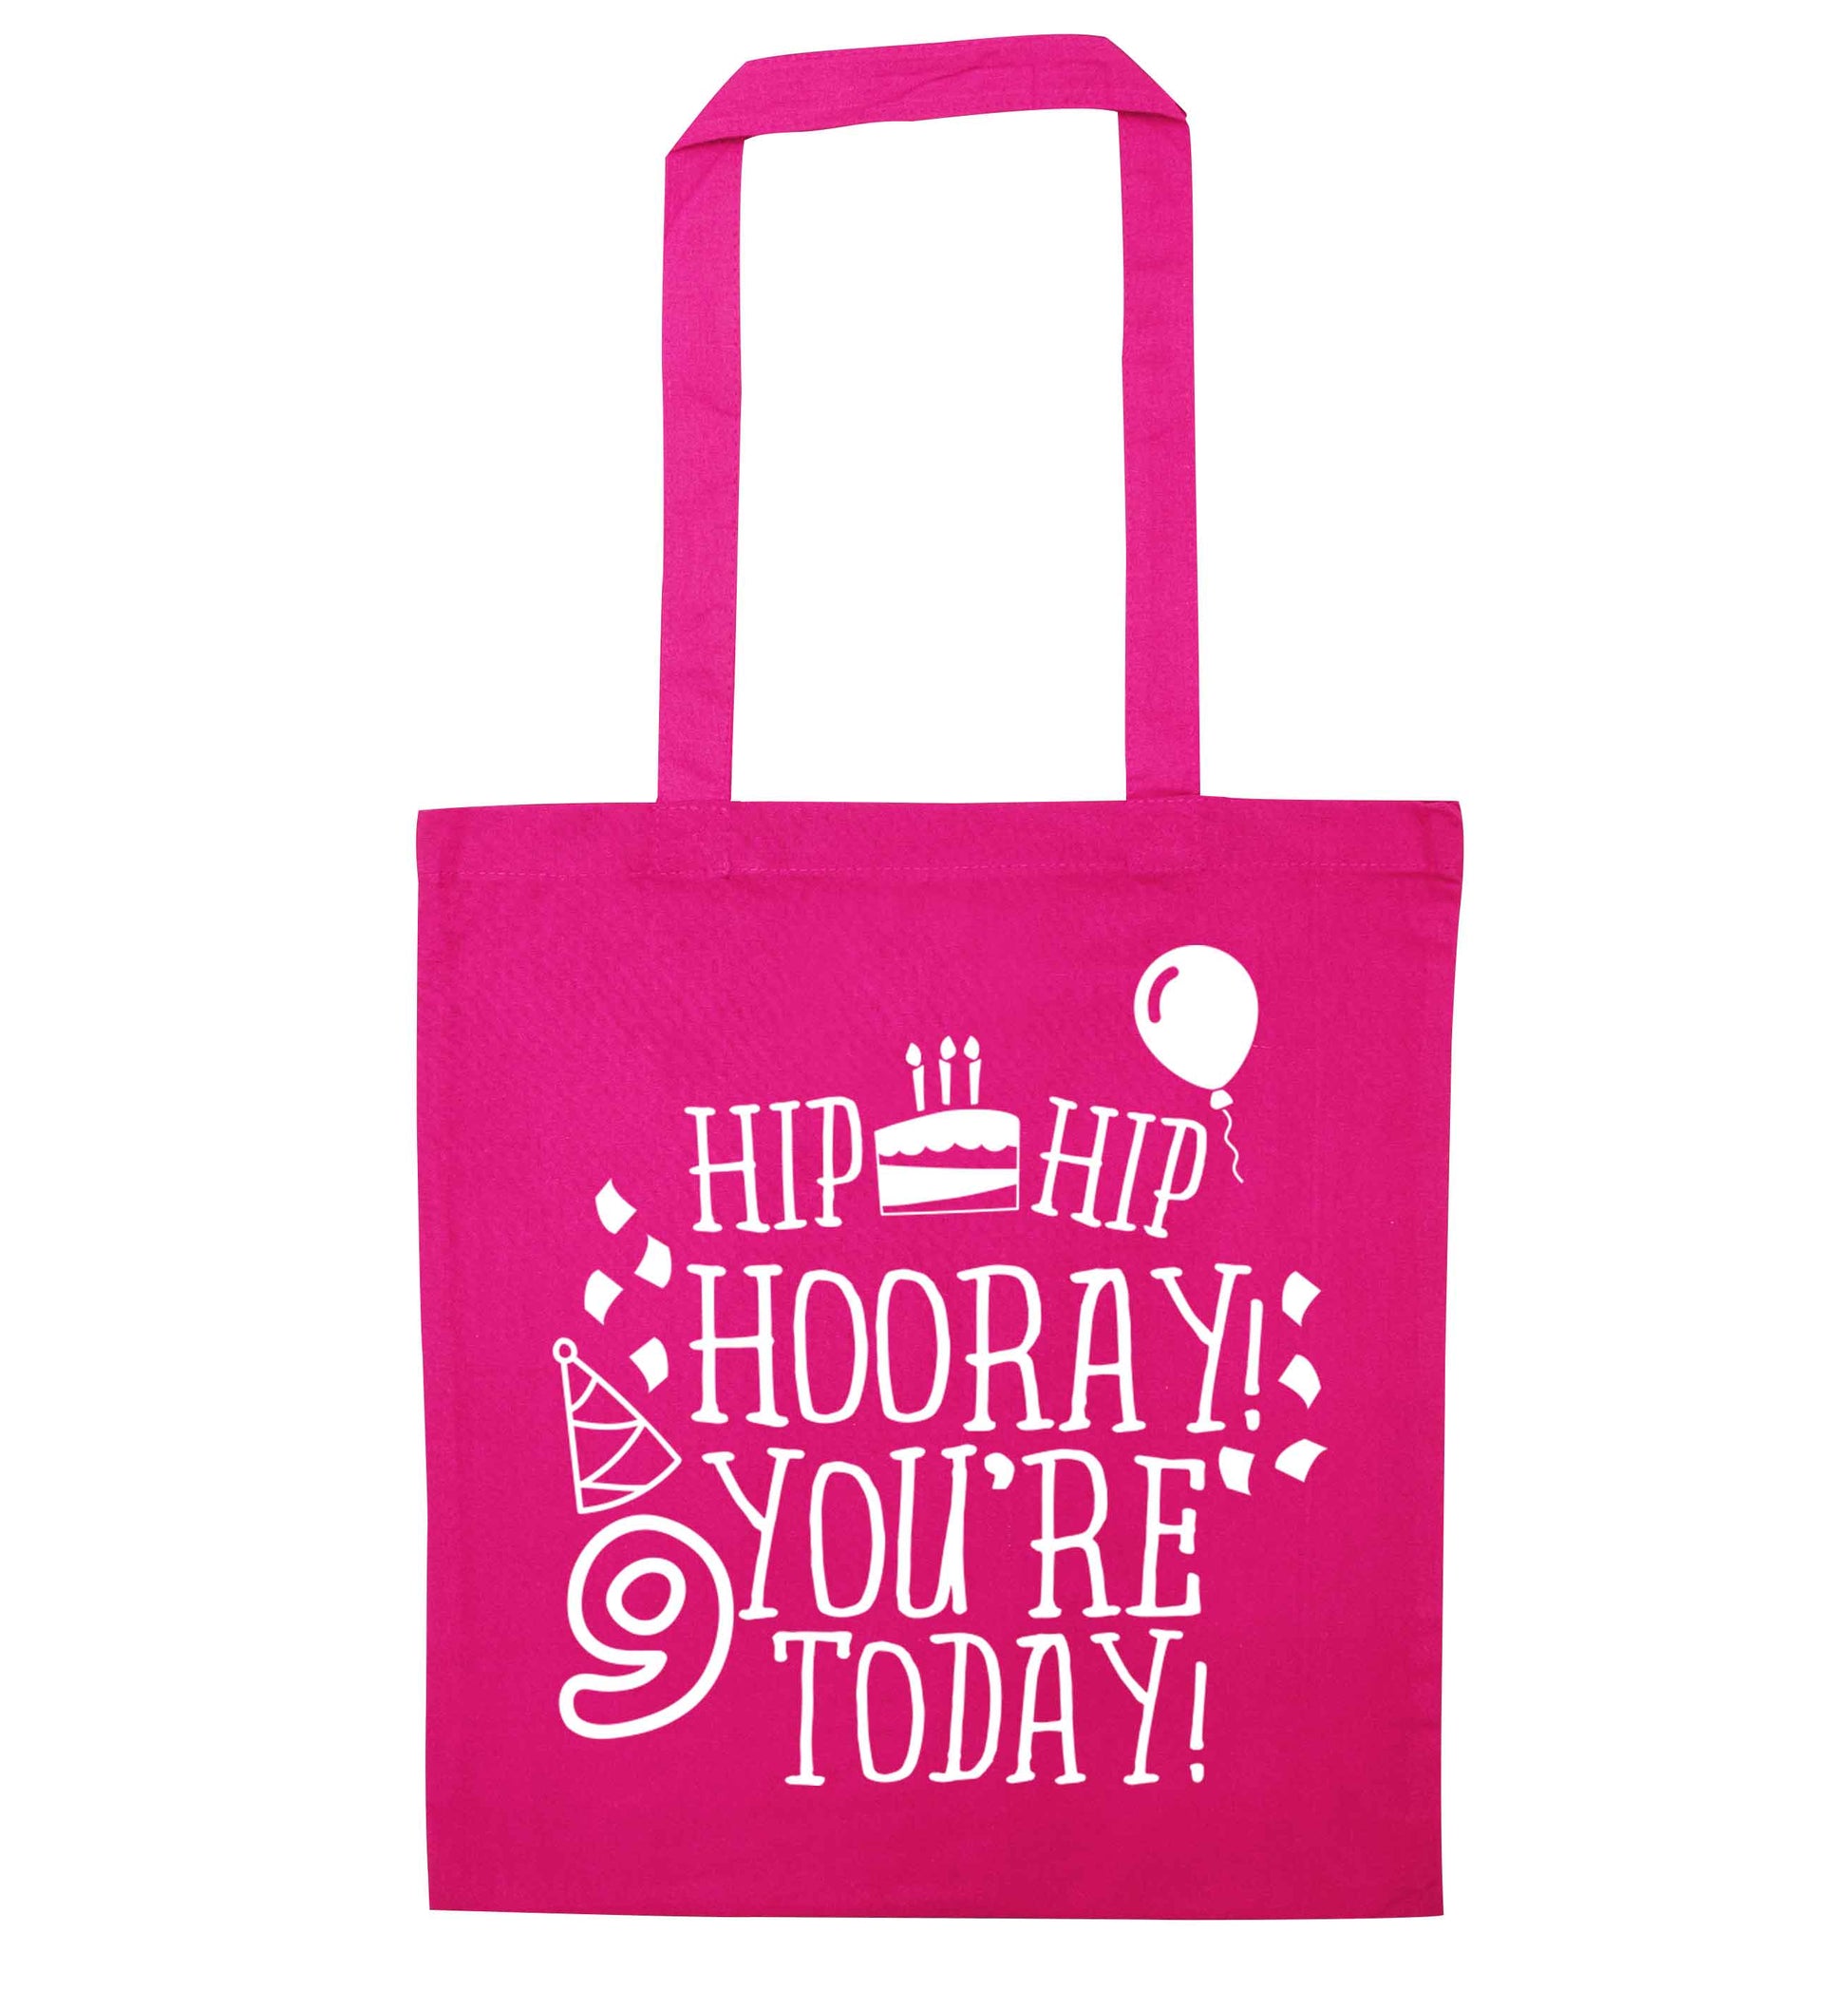 Hip hip hooray you're 9 today! pink tote bag